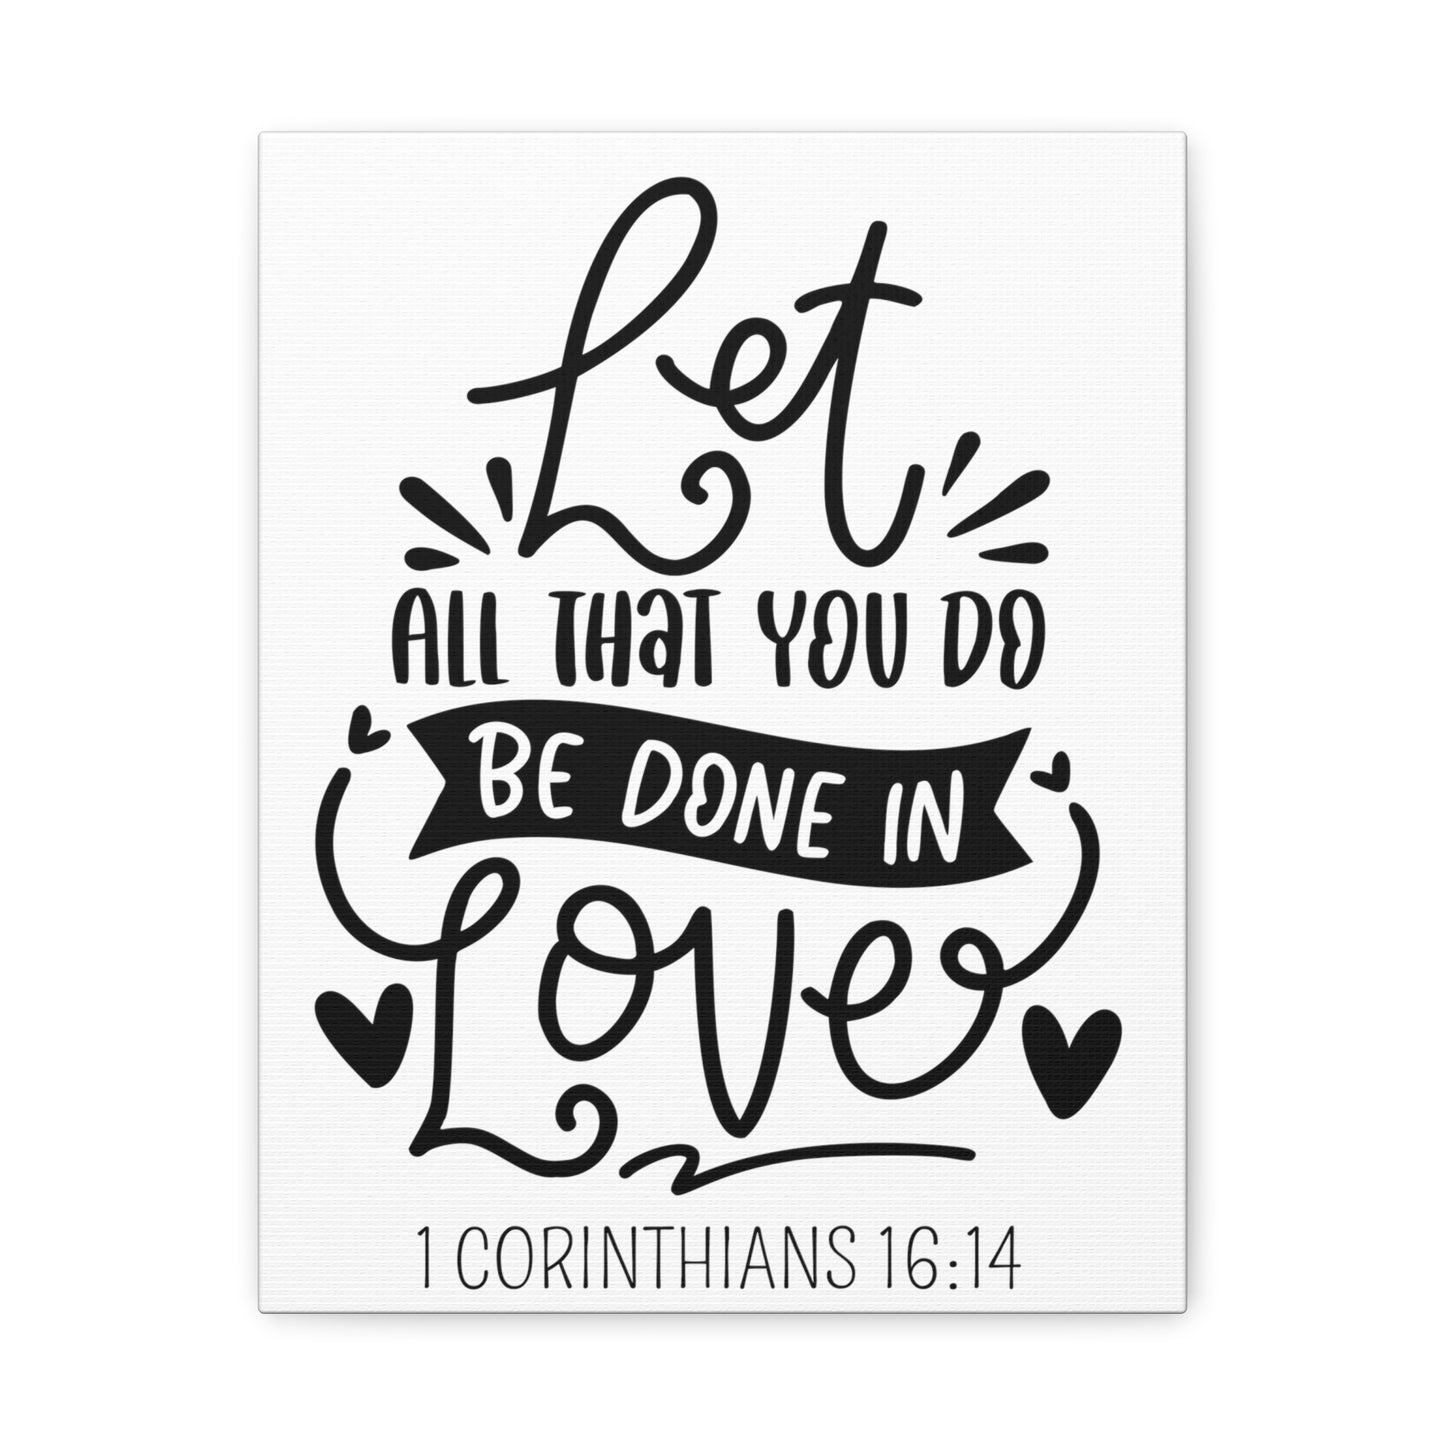 Let all you do be done in love Canvas Gallery Wraps